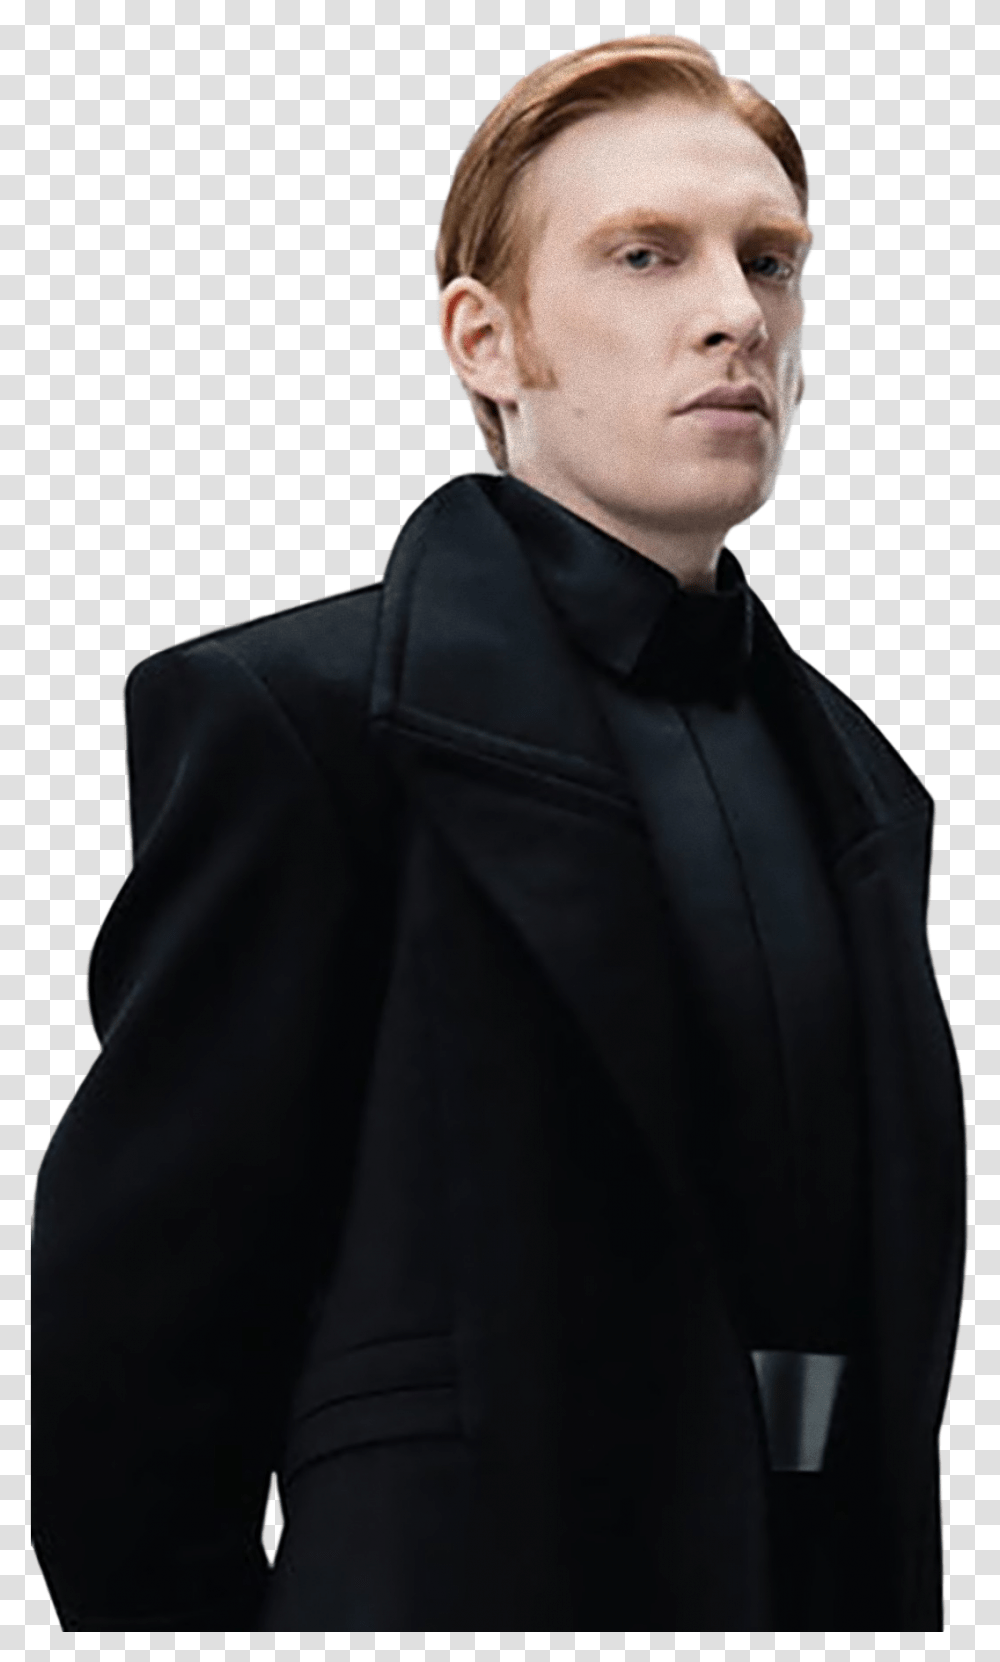 Download Hd Hitler Kylo Ren General Hux Star Star Wars General Hux, Clothing, Person, Suit, Overcoat Transparent Png